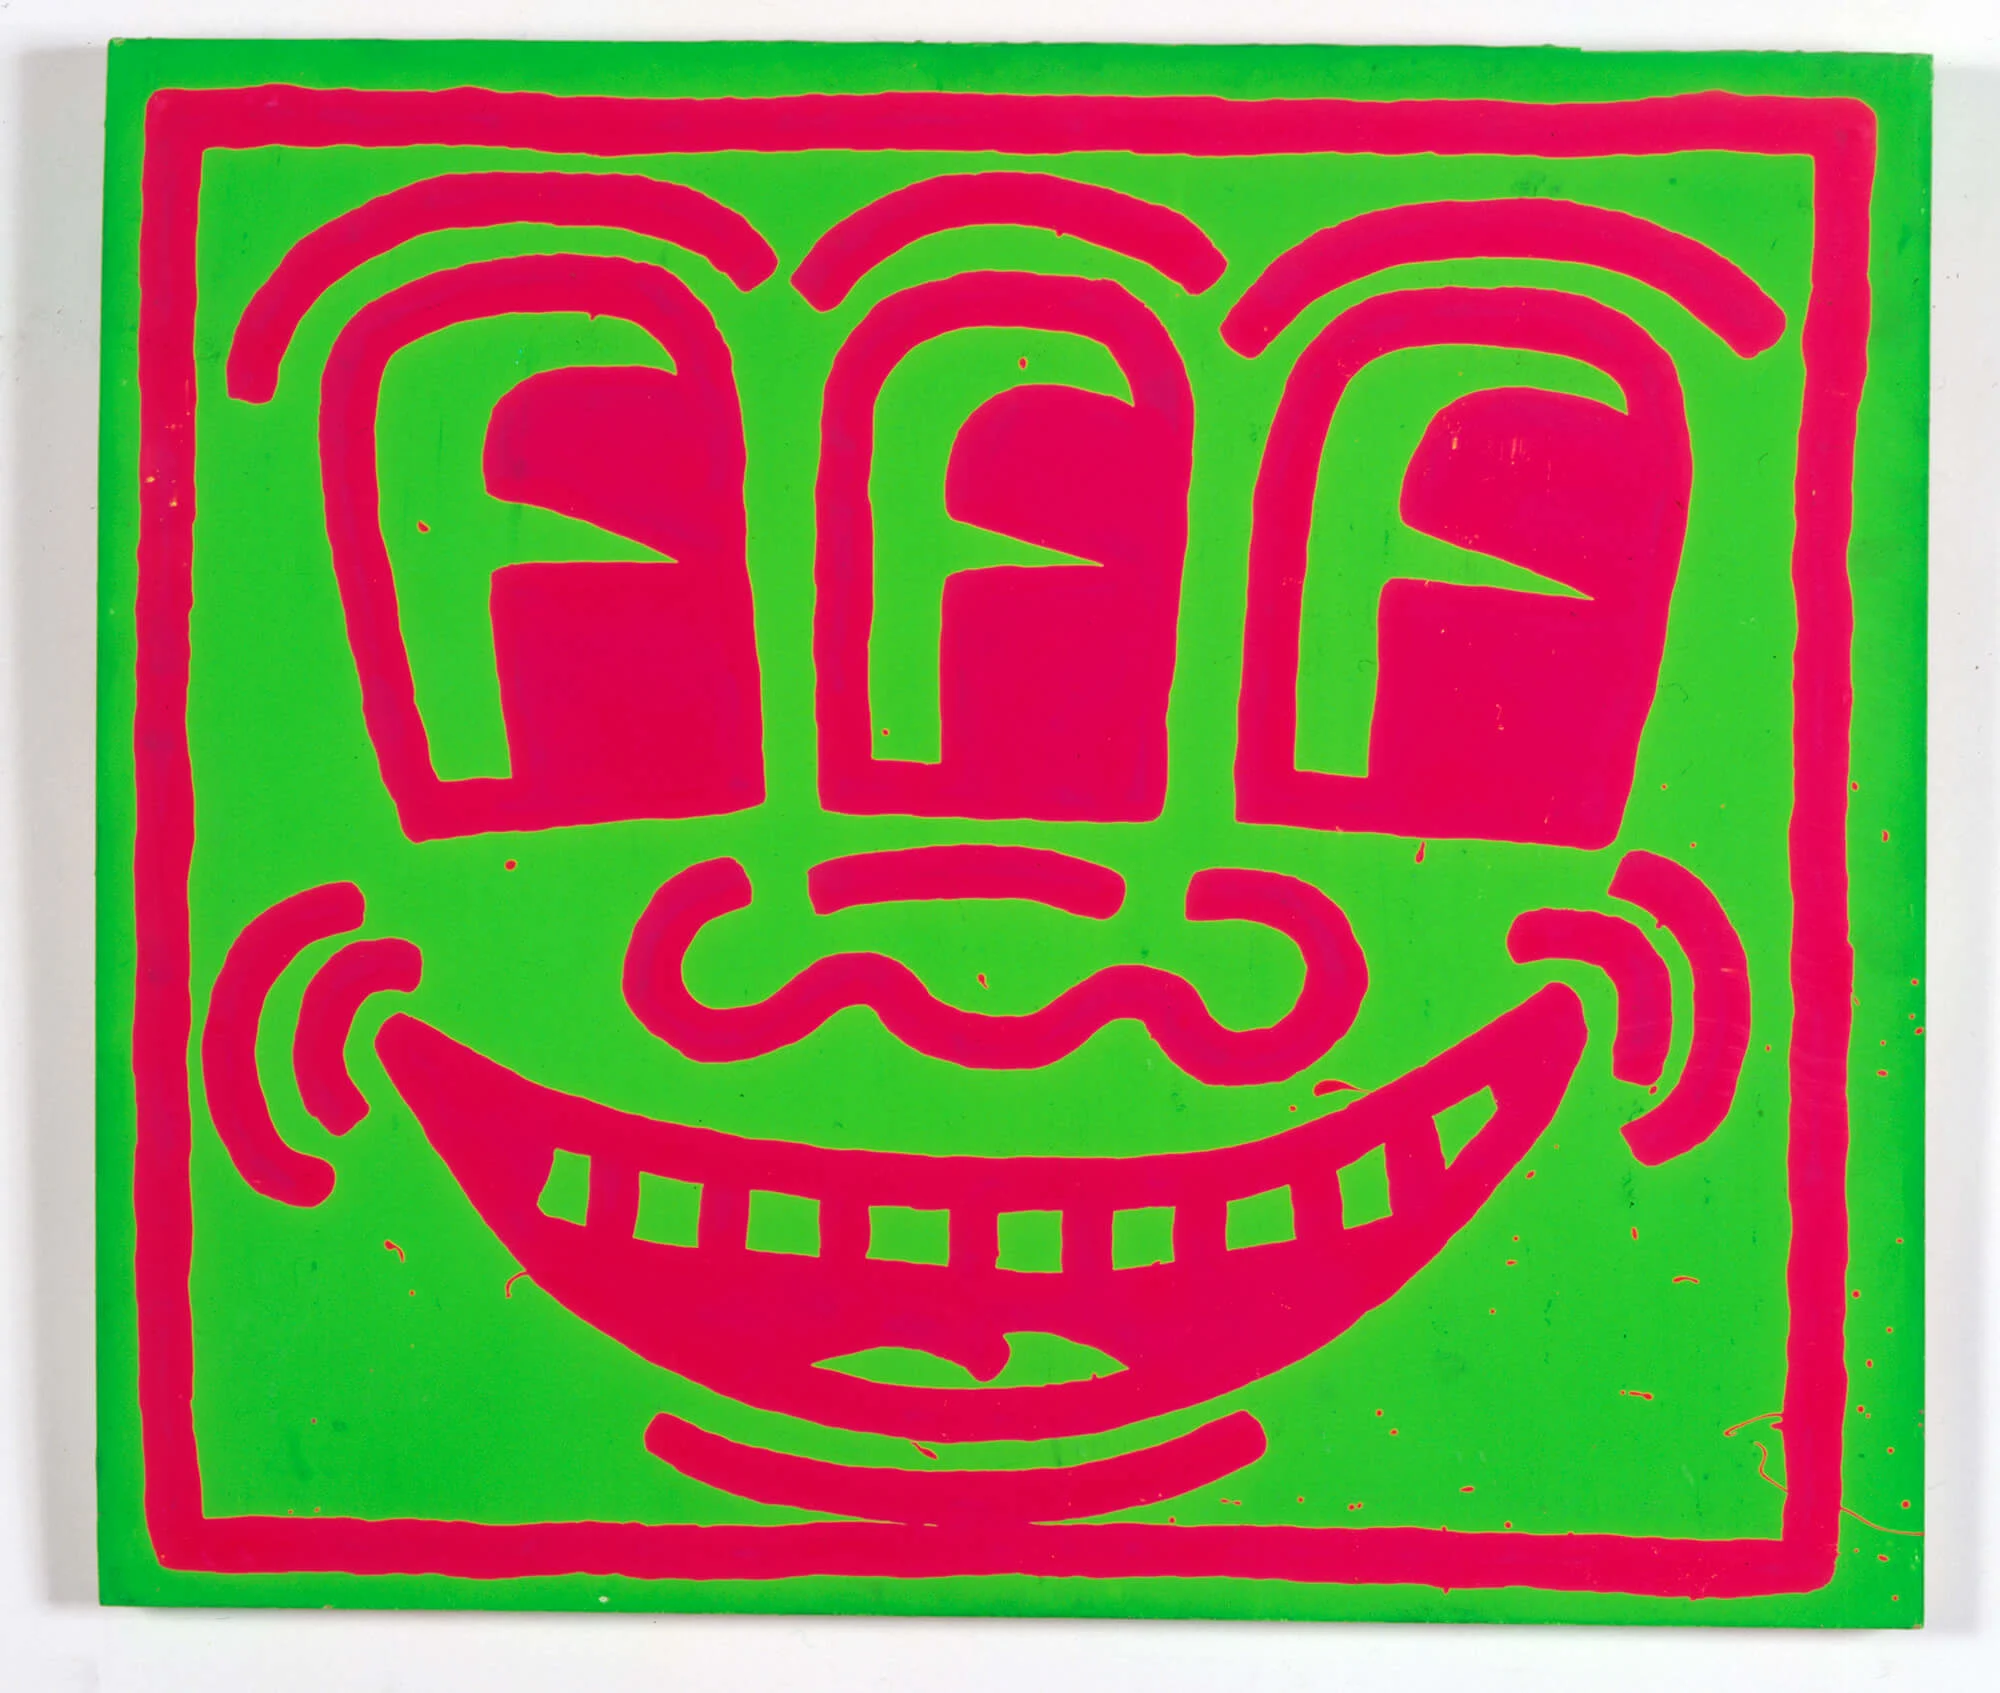 Untitled, 1982 ©Keith Haring Foundation